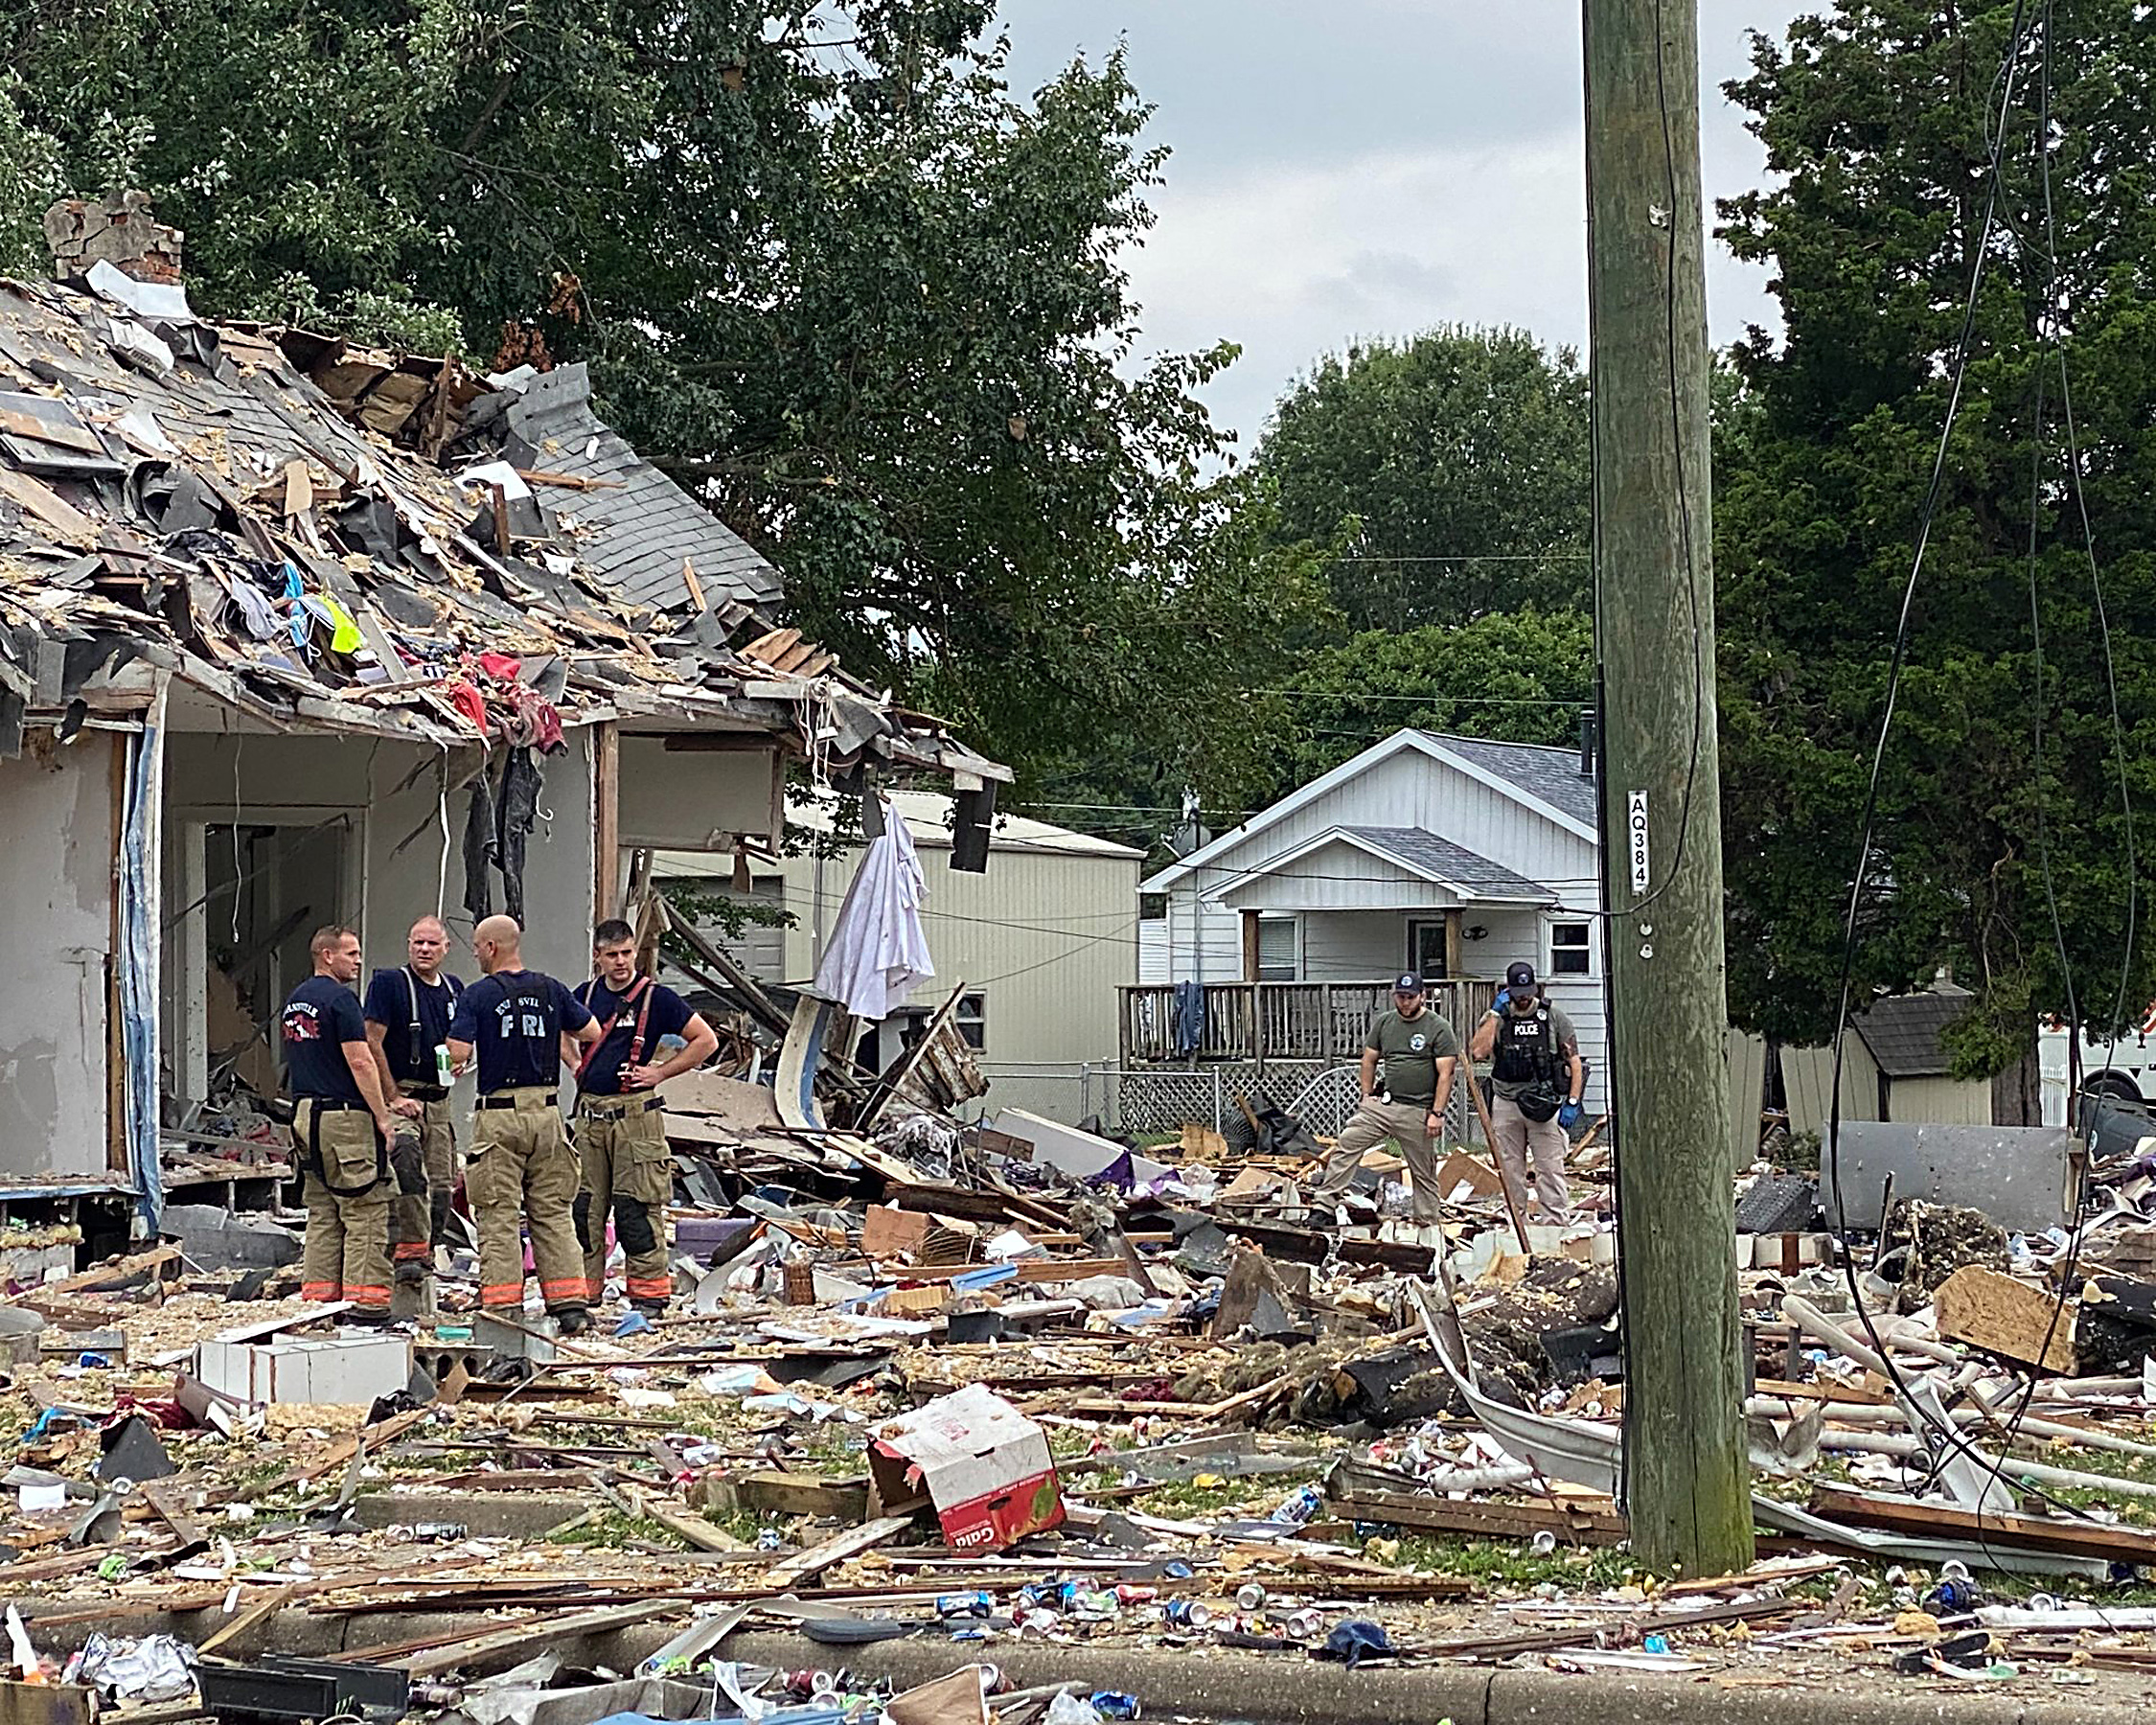 PHOTO:  The damage to the area where homes were damaged after a house explosion with multiple agencies on the scene on Aug. 10, 2022 in Evansville, Ind.